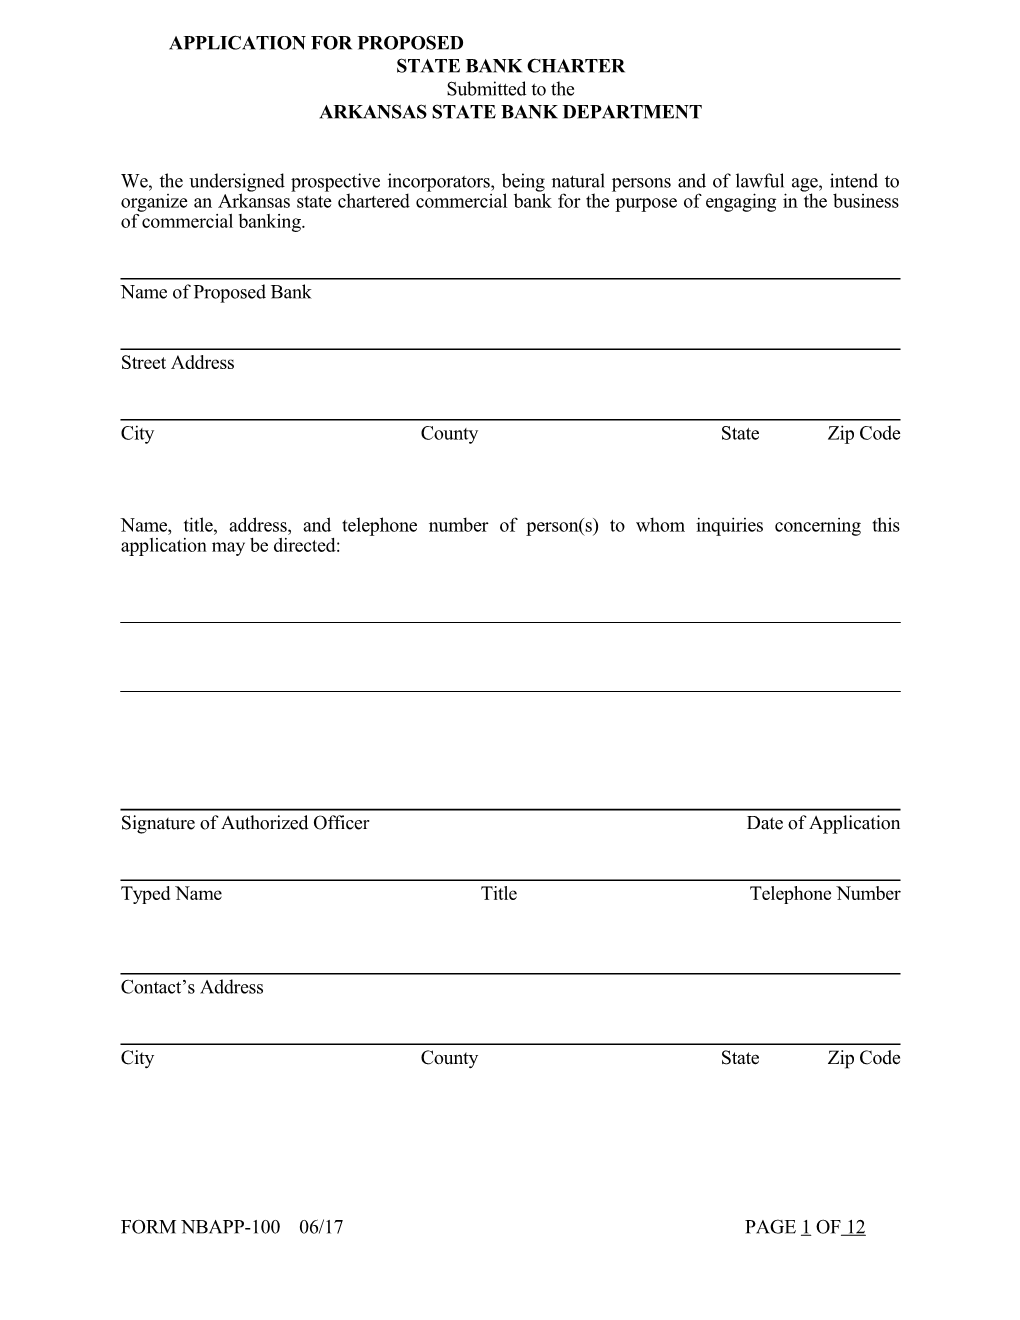 Application for Proposed